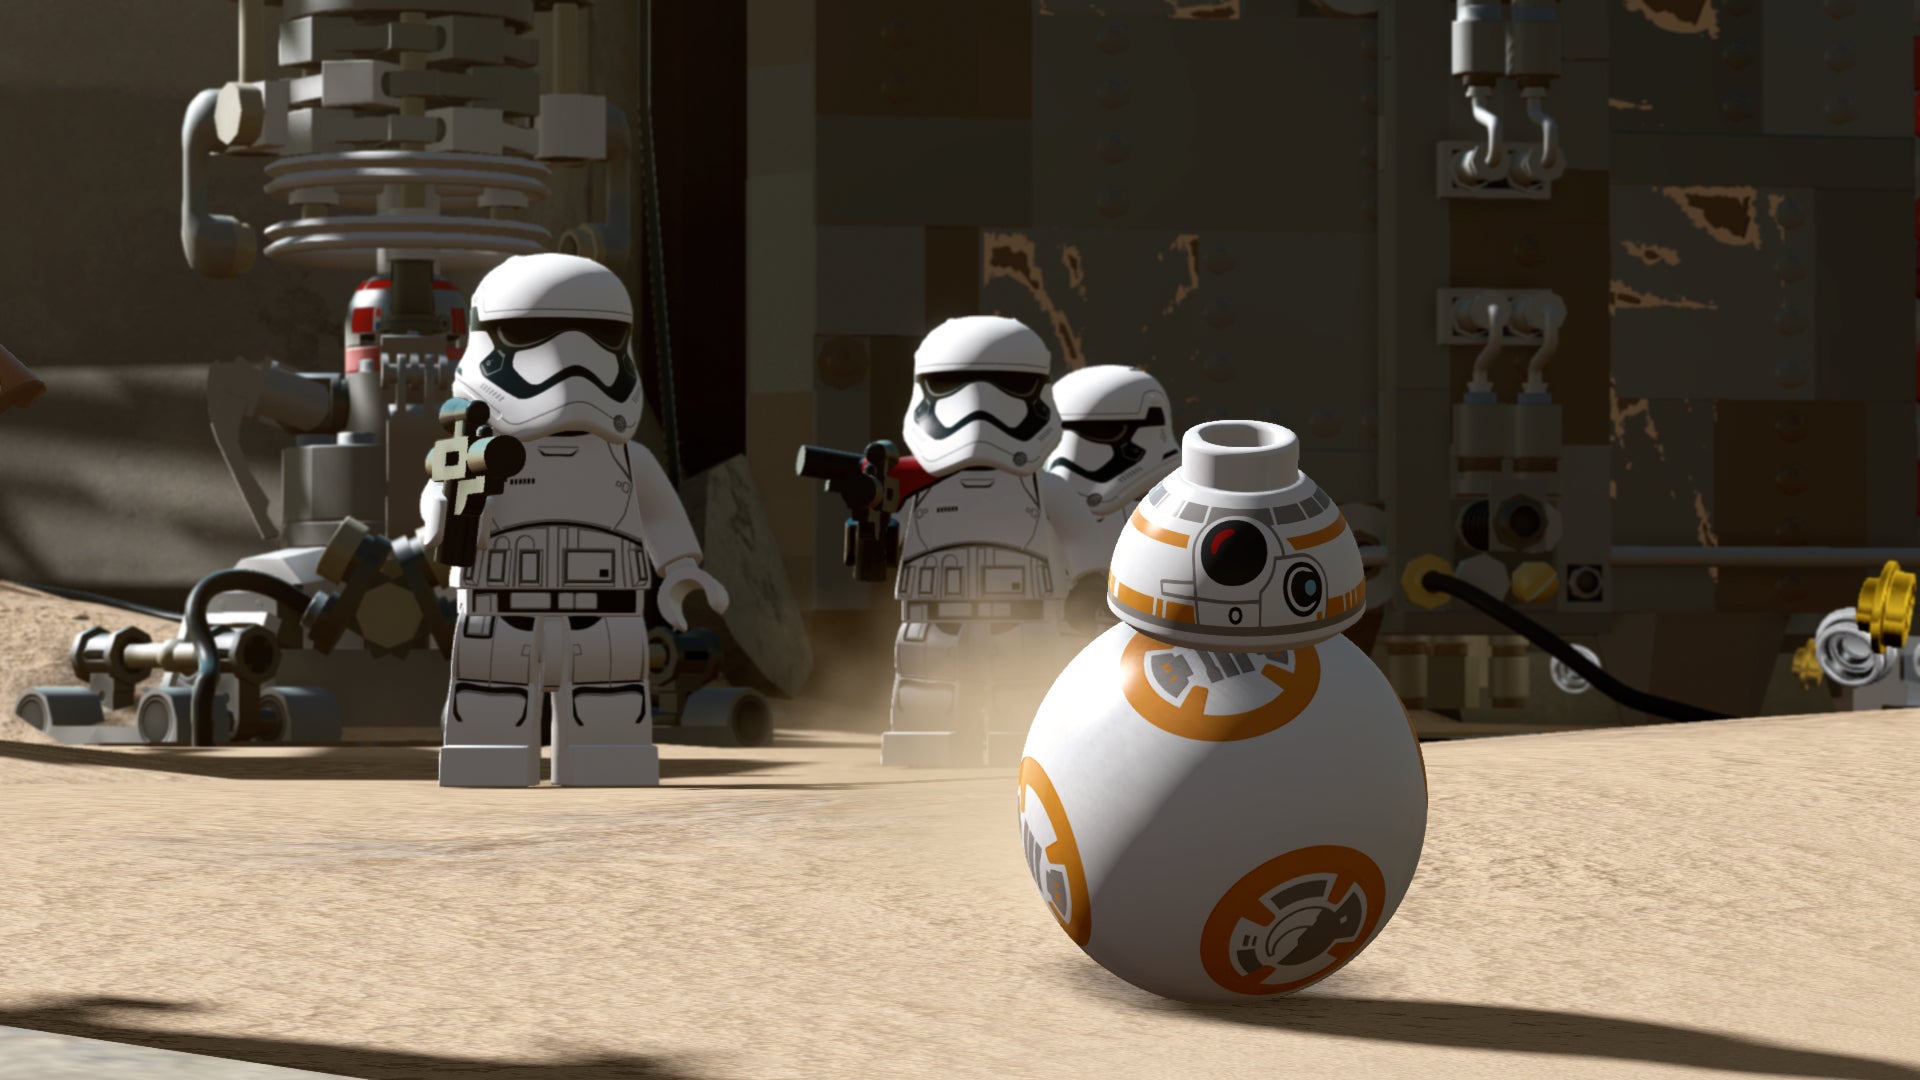 Image for Star Wars: The Force Awakens is getting a LEGO game in June